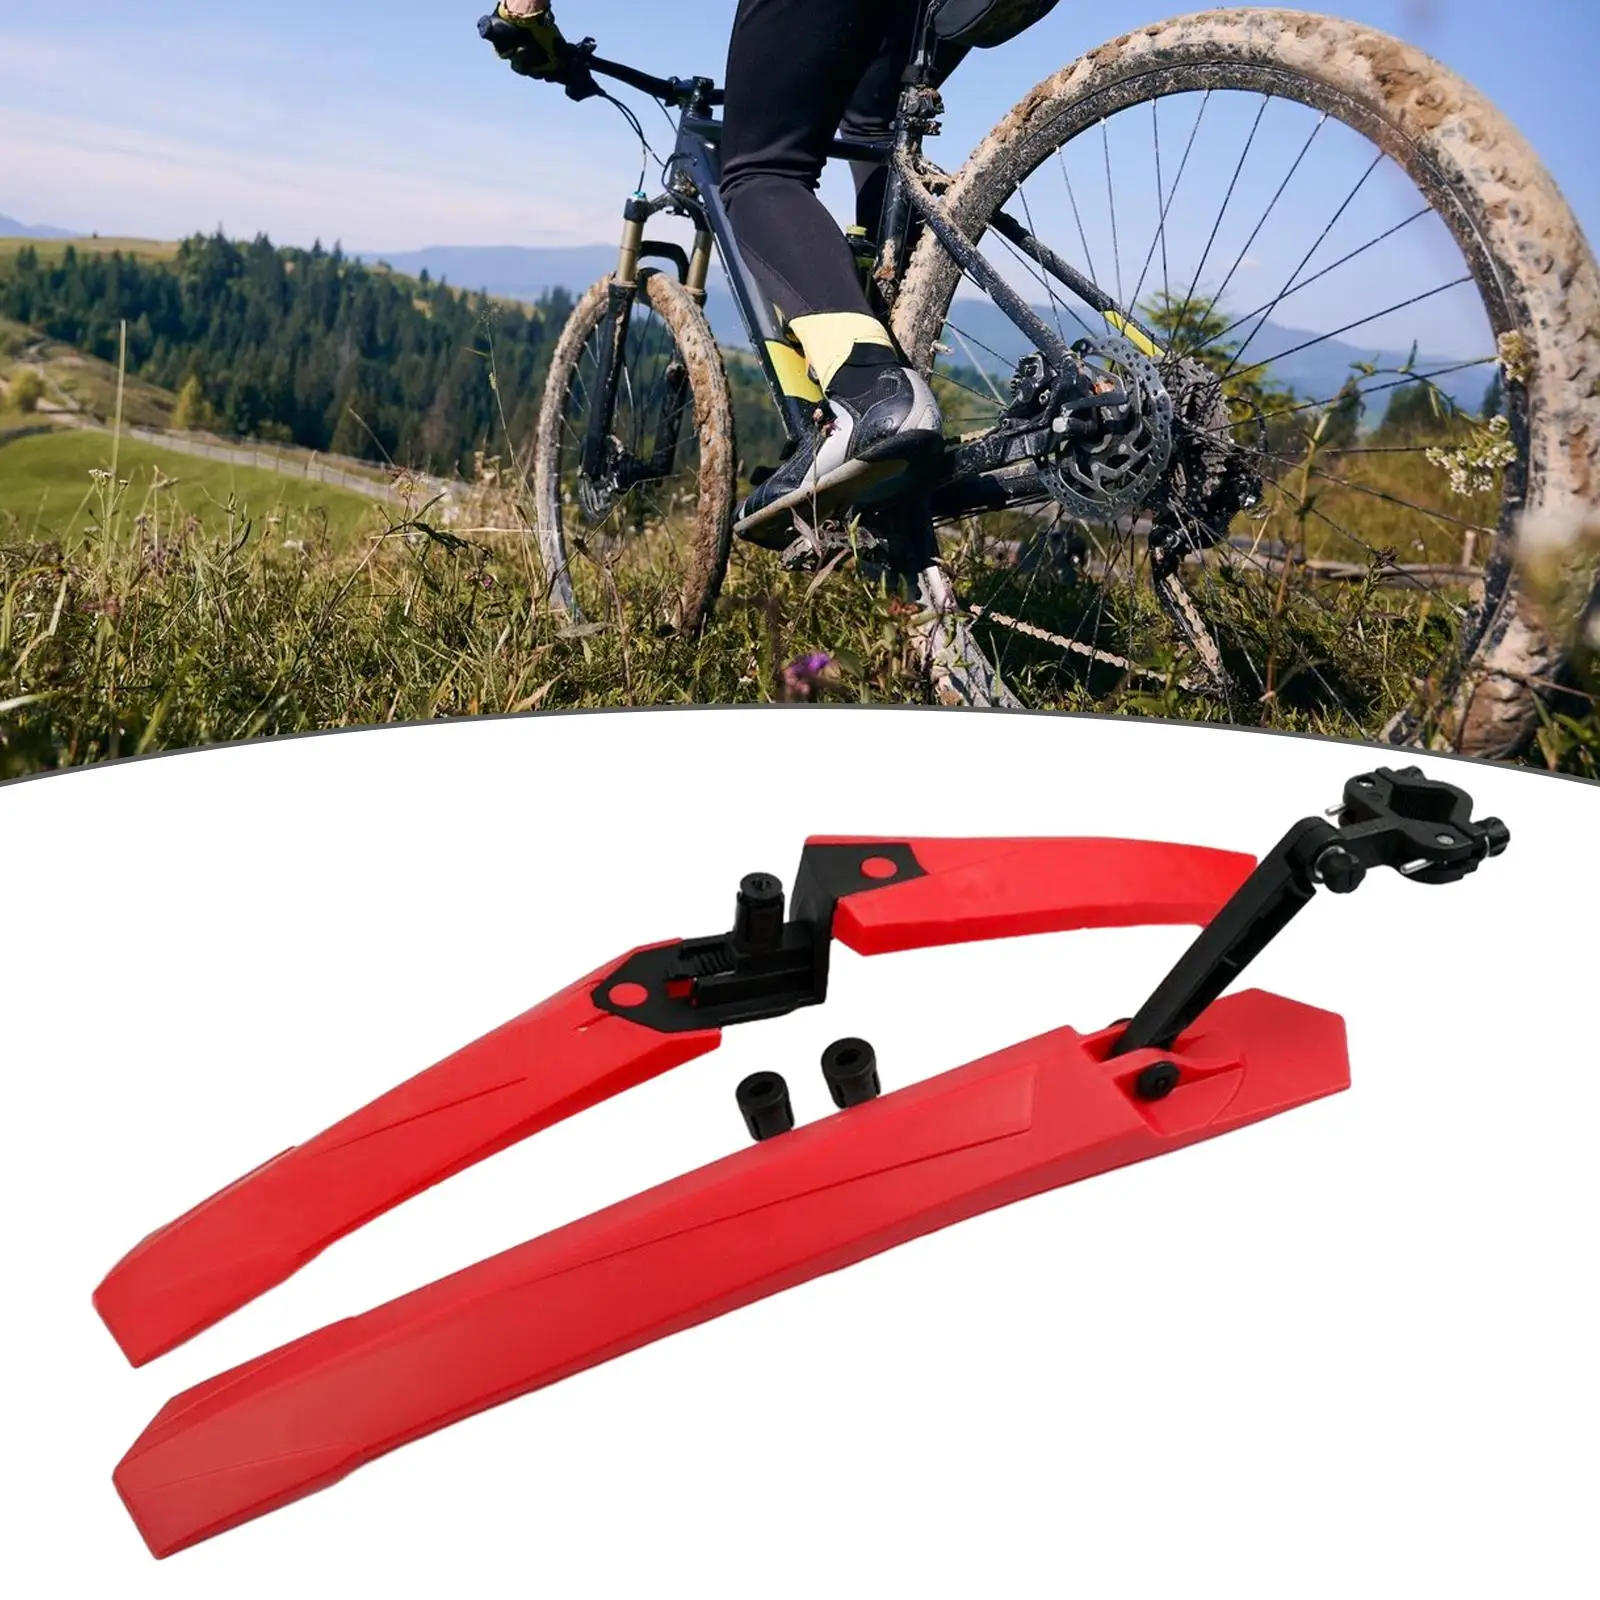 Mountain Bike Mudguard Set Simple Installation Bike Front Rear Fenders Bicycle Mud Guard for Riding Components Accessories